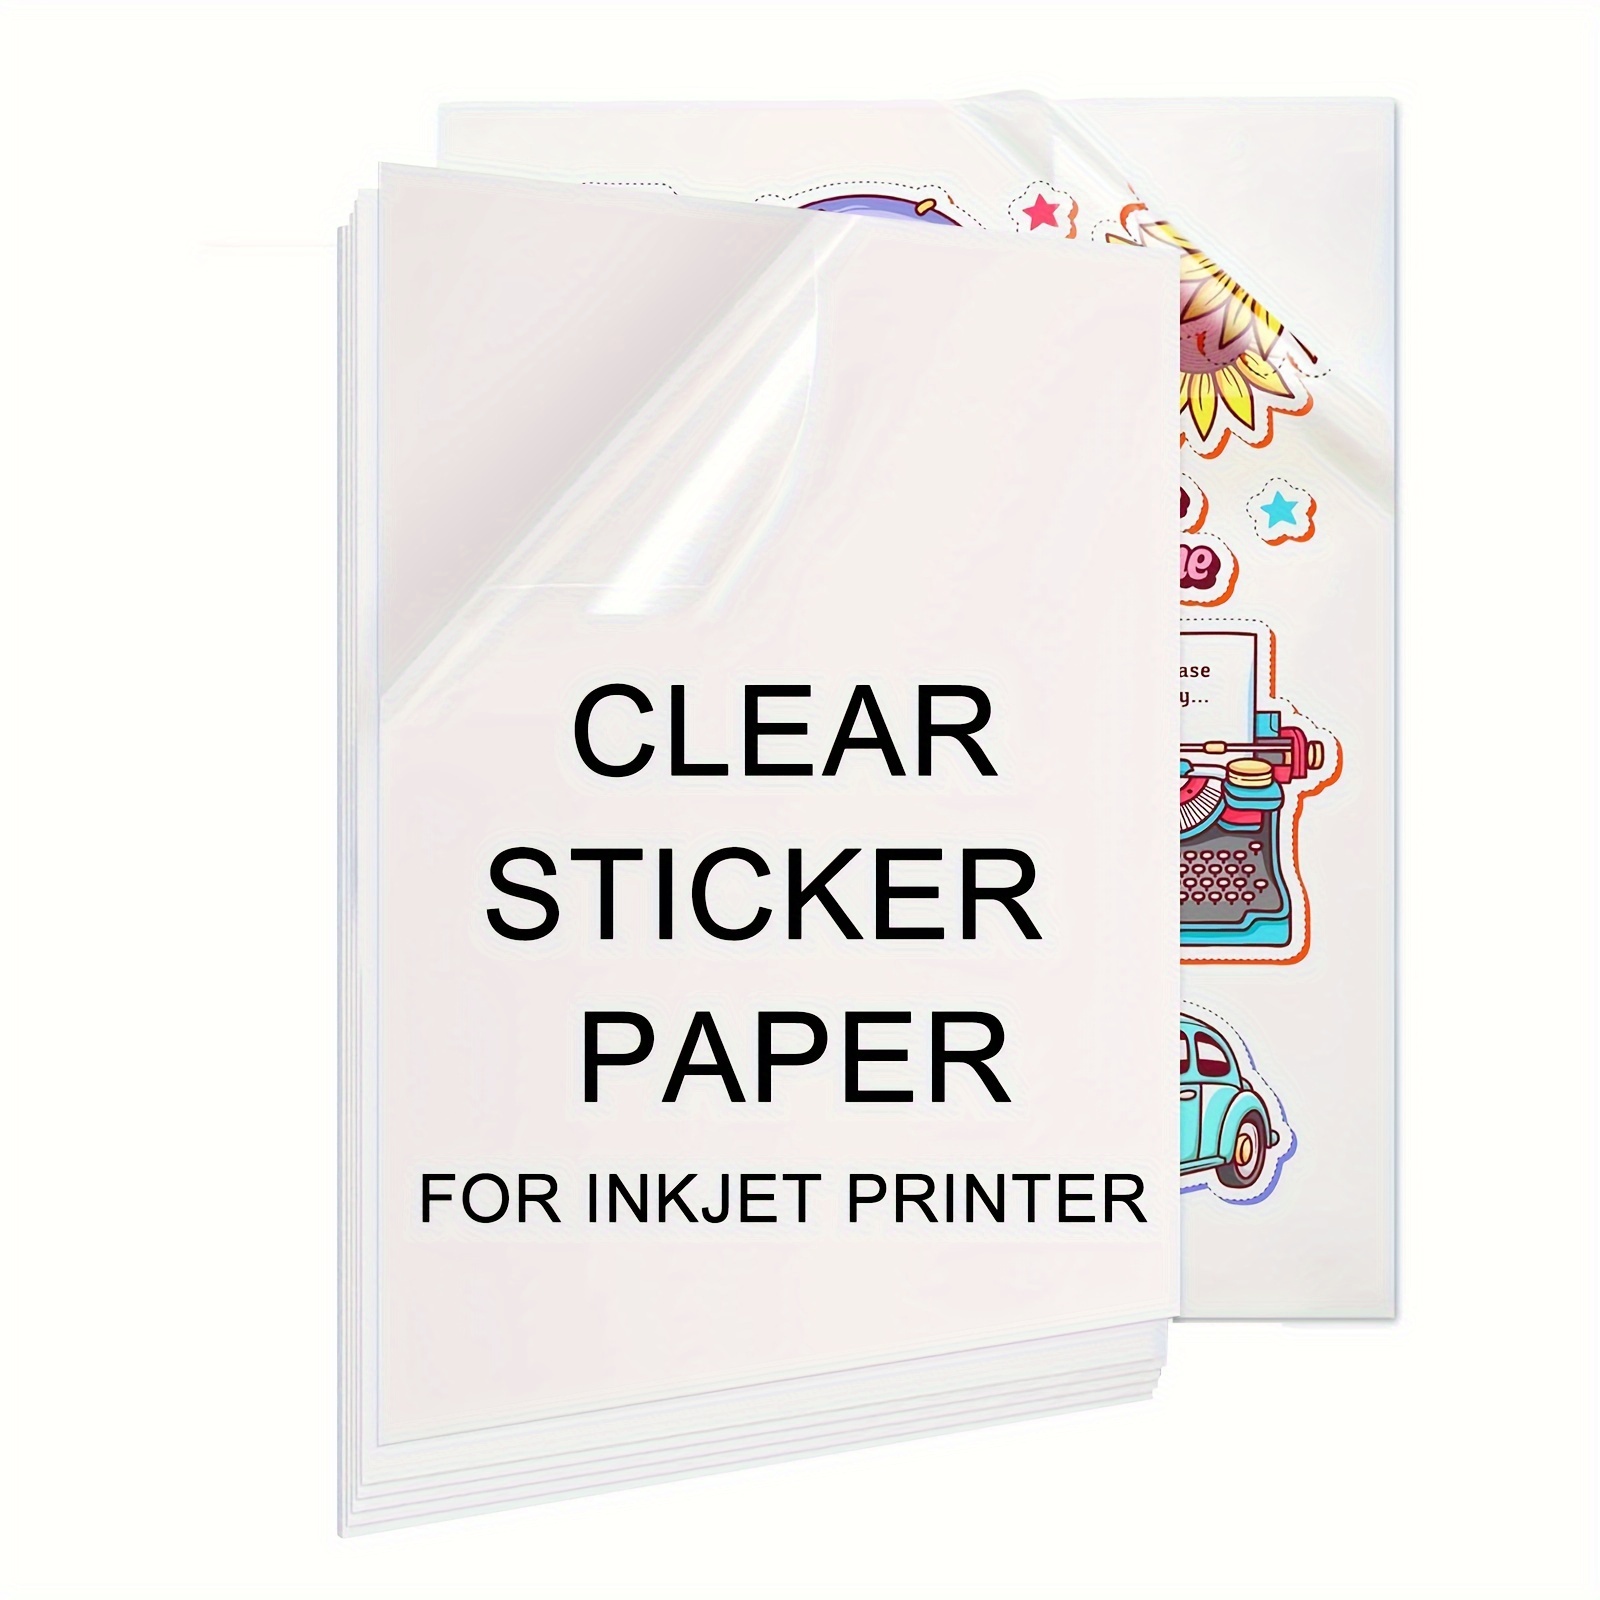 

20 Sheets Printable Vinyl Sticker Paper For Inkjet Printer 100% Clear Transparent Non-waterproof Decal Paper Self-adhesive Sheets 8.3"x11.7"- Dries Quickly And Holds Ink Beautifully